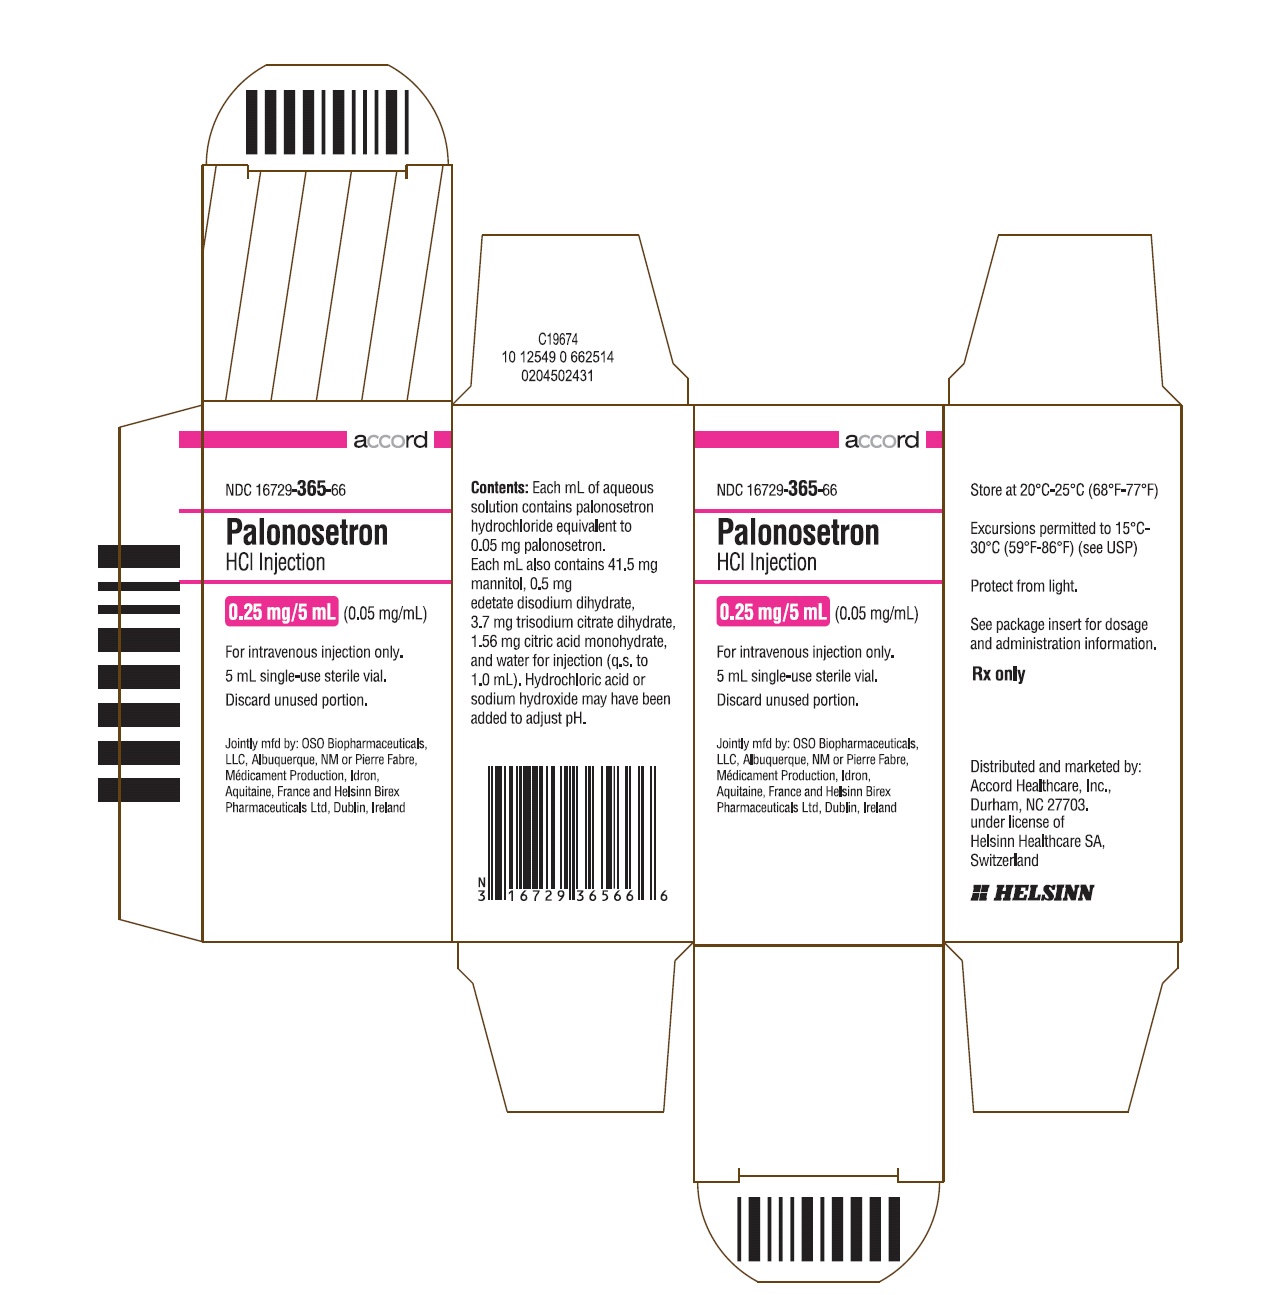 PRINCIPAL DISPLAY PANEL - 0.075 mg/1.5 mL Injection NDC: <a href=/NDC/16729-365-66>16729-365-66</a> Rx only palonosetron HCl injection 0.075 mg/1.5 mL single-use vial For intravenous injection only. 1.5-mL single-use sterile vial. 